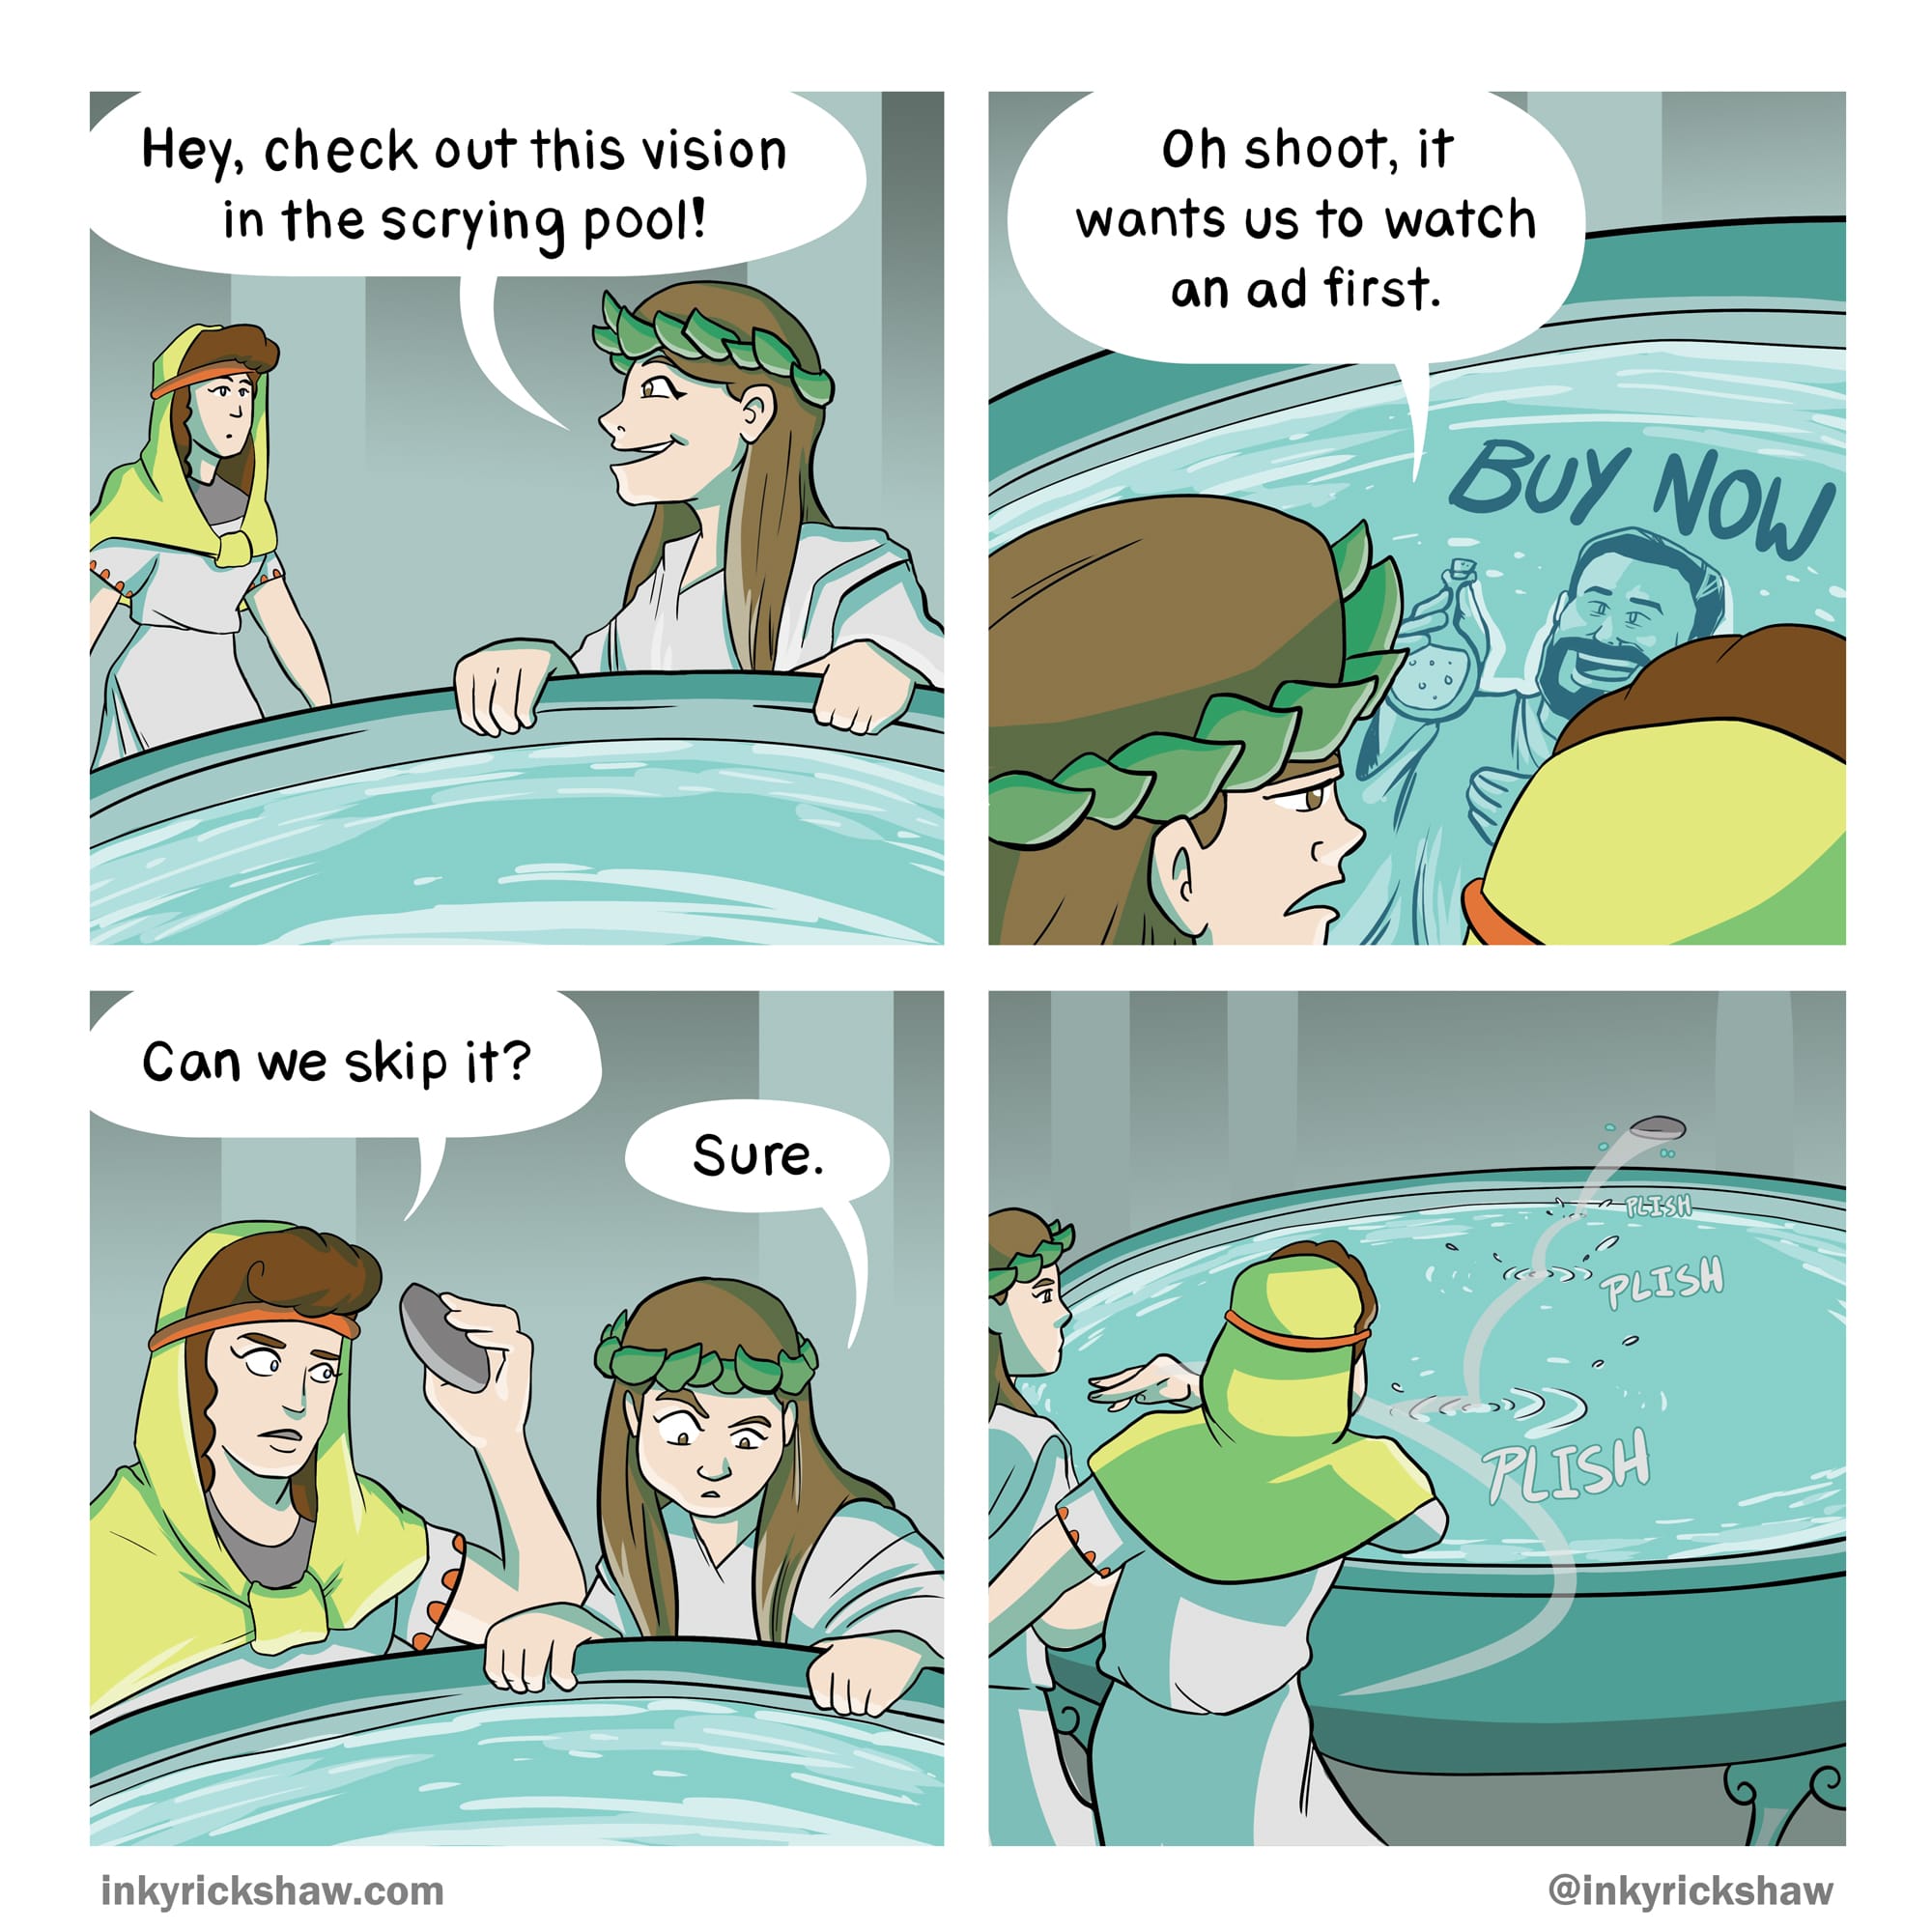 comics comics comics text: Hey, check out this vision in the scrying pool! Can we skip it? Sure. inkyrickshaw.com Oh shoot, it wants us to watch an ad first. 71191 @inkyrickshaw 